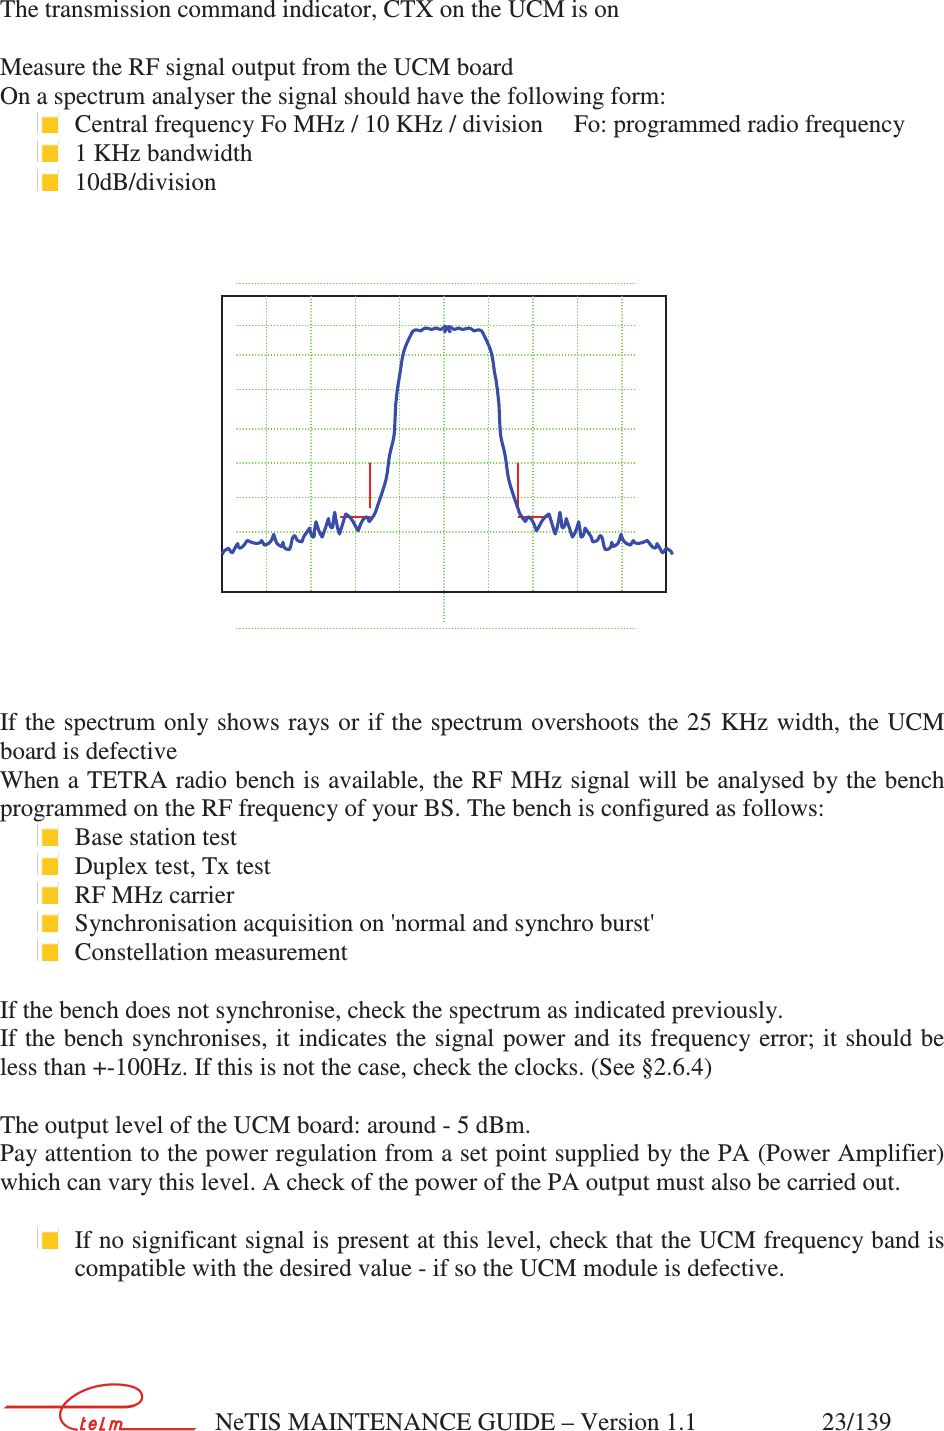        NeTIS MAINTENANCE GUIDE – Version 1.1                    23/139    The transmission command indicator, CTX on the UCM is on  Measure the RF signal output from the UCM board On a spectrum analyser the signal should have the following form:  Central frequency Fo MHz / 10 KHz / division     Fo: programmed radio frequency   1 KHz bandwidth  10dB/division        If the spectrum only shows rays or if the spectrum overshoots the 25 KHz width, the UCM board is defective When a TETRA radio bench is available, the RF MHz signal will be analysed by the bench programmed on the RF frequency of your BS. The bench is configured as follows:  Base station test  Duplex test, Tx test  RF MHz carrier  Synchronisation acquisition on &apos;normal and synchro burst&apos;  Constellation measurement  If the bench does not synchronise, check the spectrum as indicated previously. If the bench synchronises, it indicates the signal power and its frequency error; it should be less than +-100Hz. If this is not the case, check the clocks. (See §2.6.4)  The output level of the UCM board: around - 5 dBm. Pay attention to the power regulation from a set point supplied by the PA (Power Amplifier) which can vary this level. A check of the power of the PA output must also be carried out.    If no significant signal is present at this level, check that the UCM frequency band is compatible with the desired value - if so the UCM module is defective.            